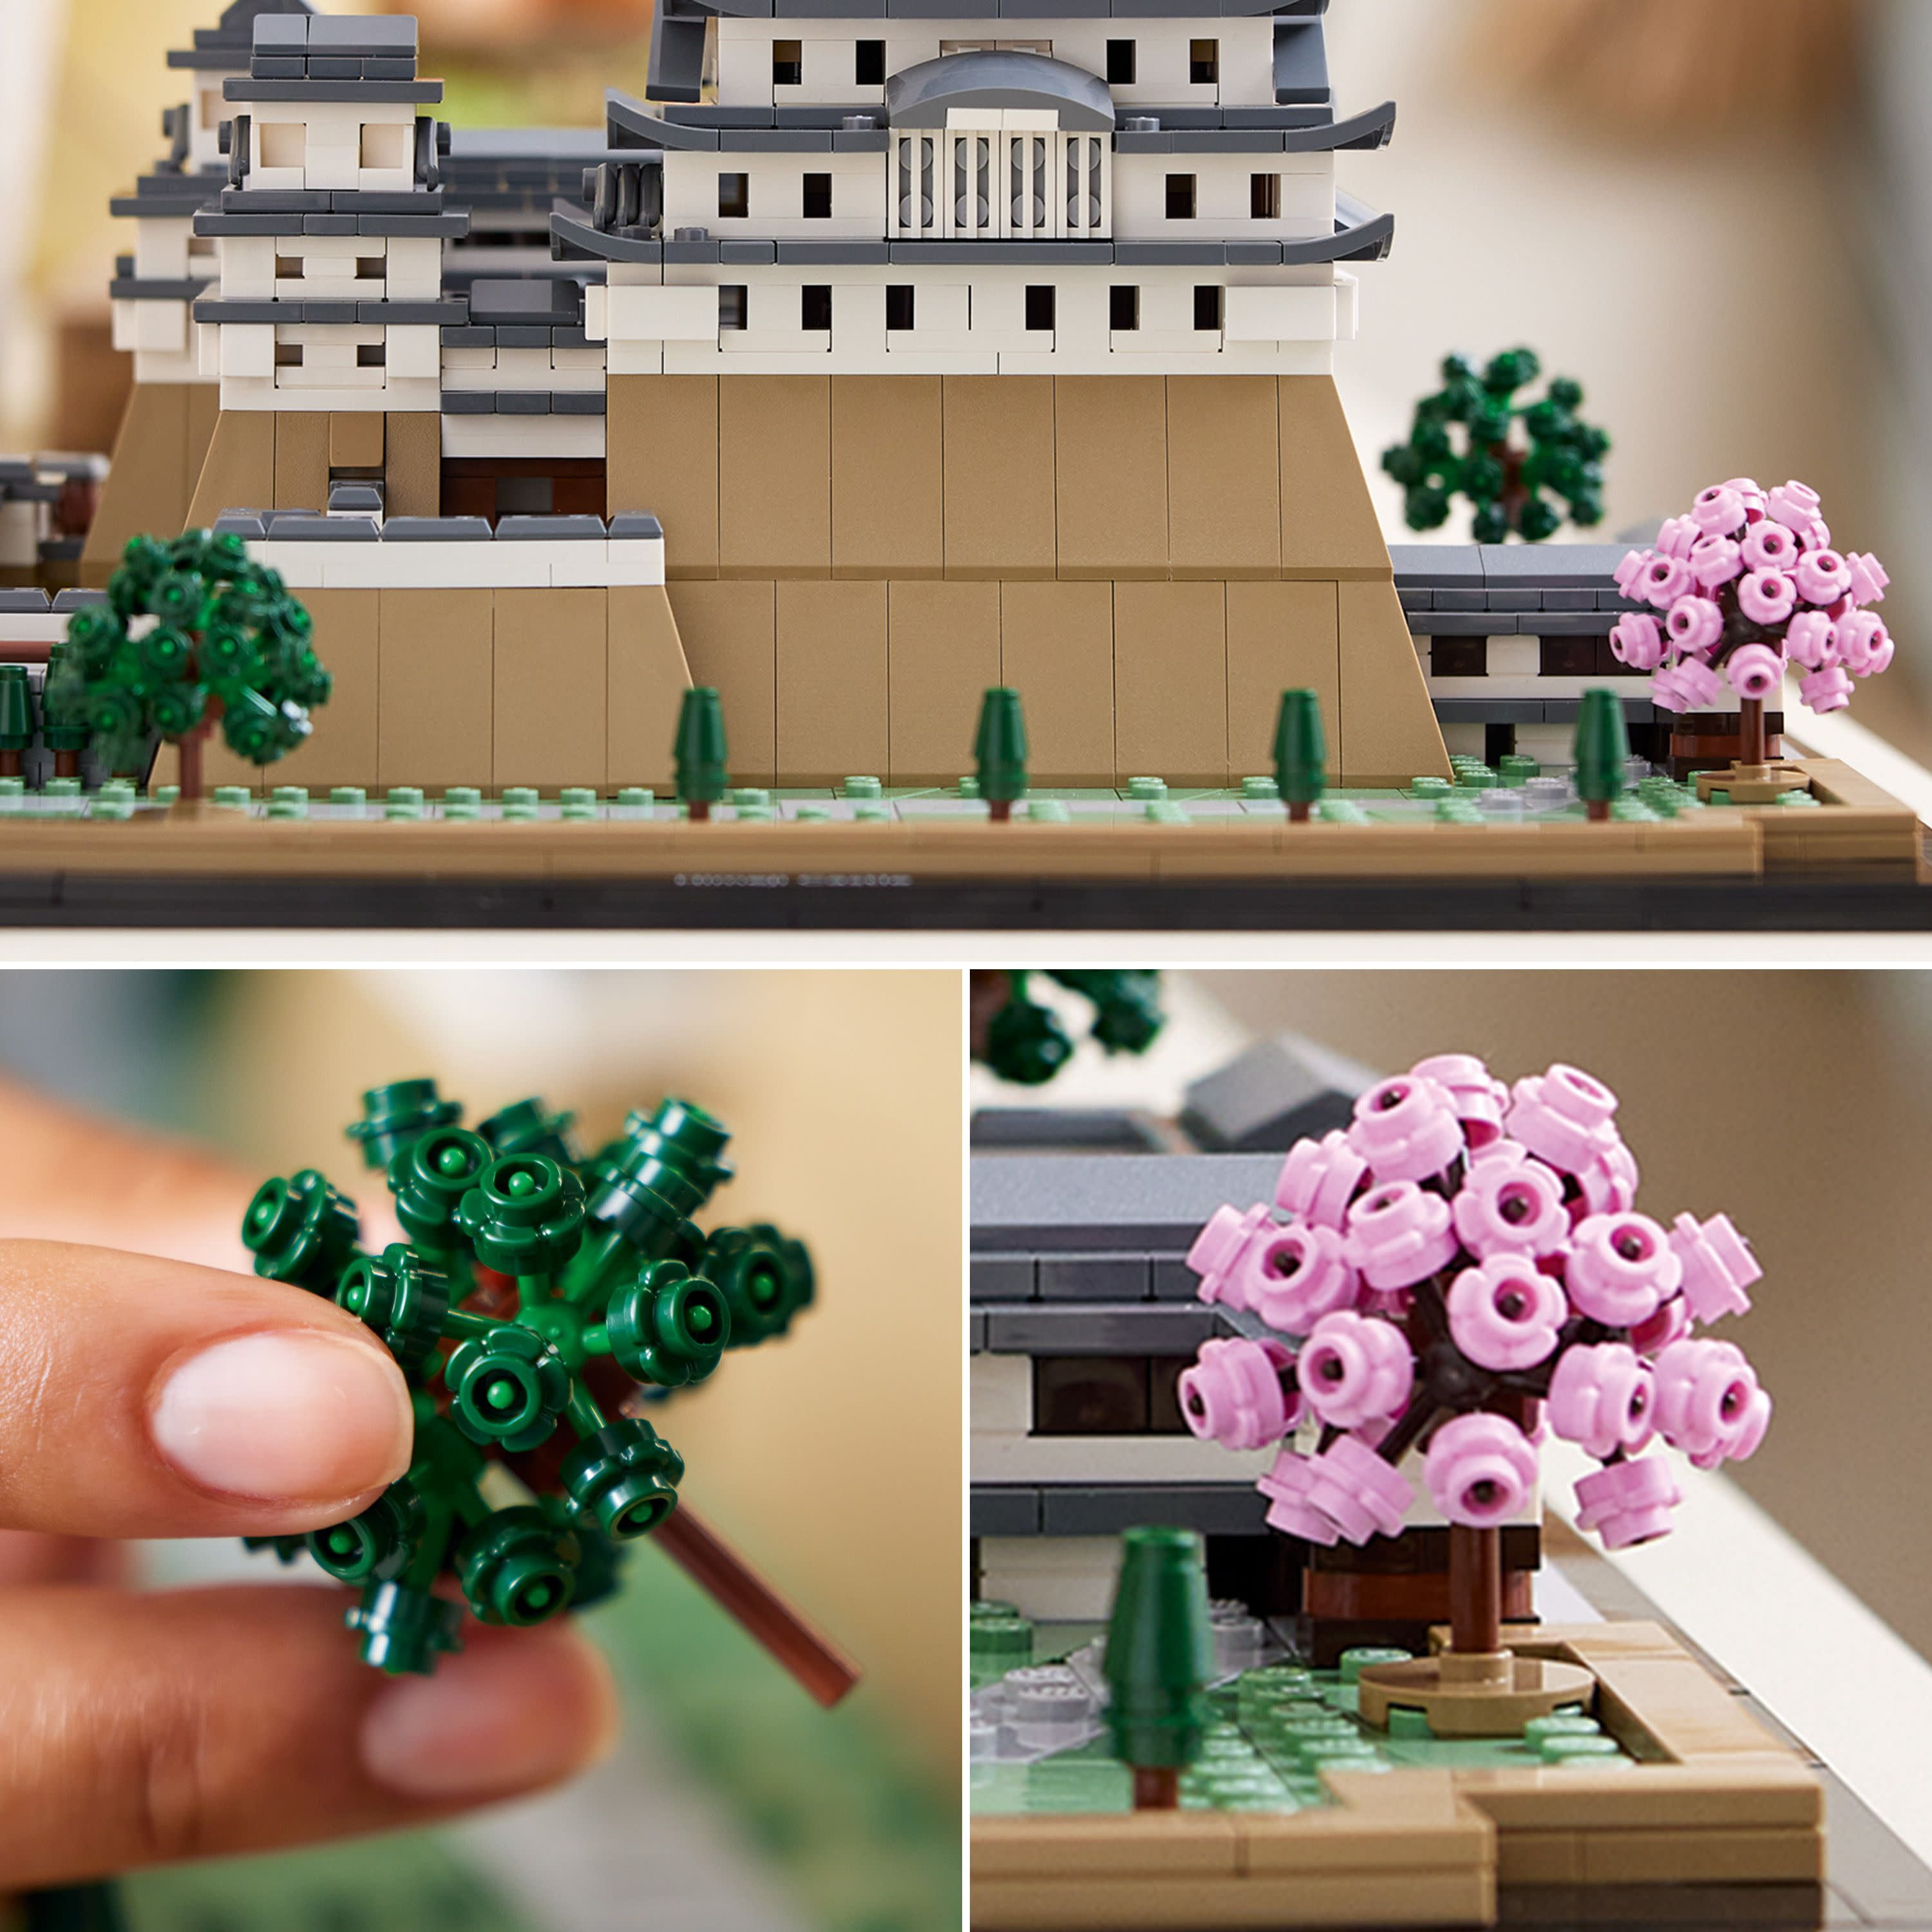 LEGO Architecture 21060 Himeji Castle rumored to be launched in August 2023  - BrickTastic